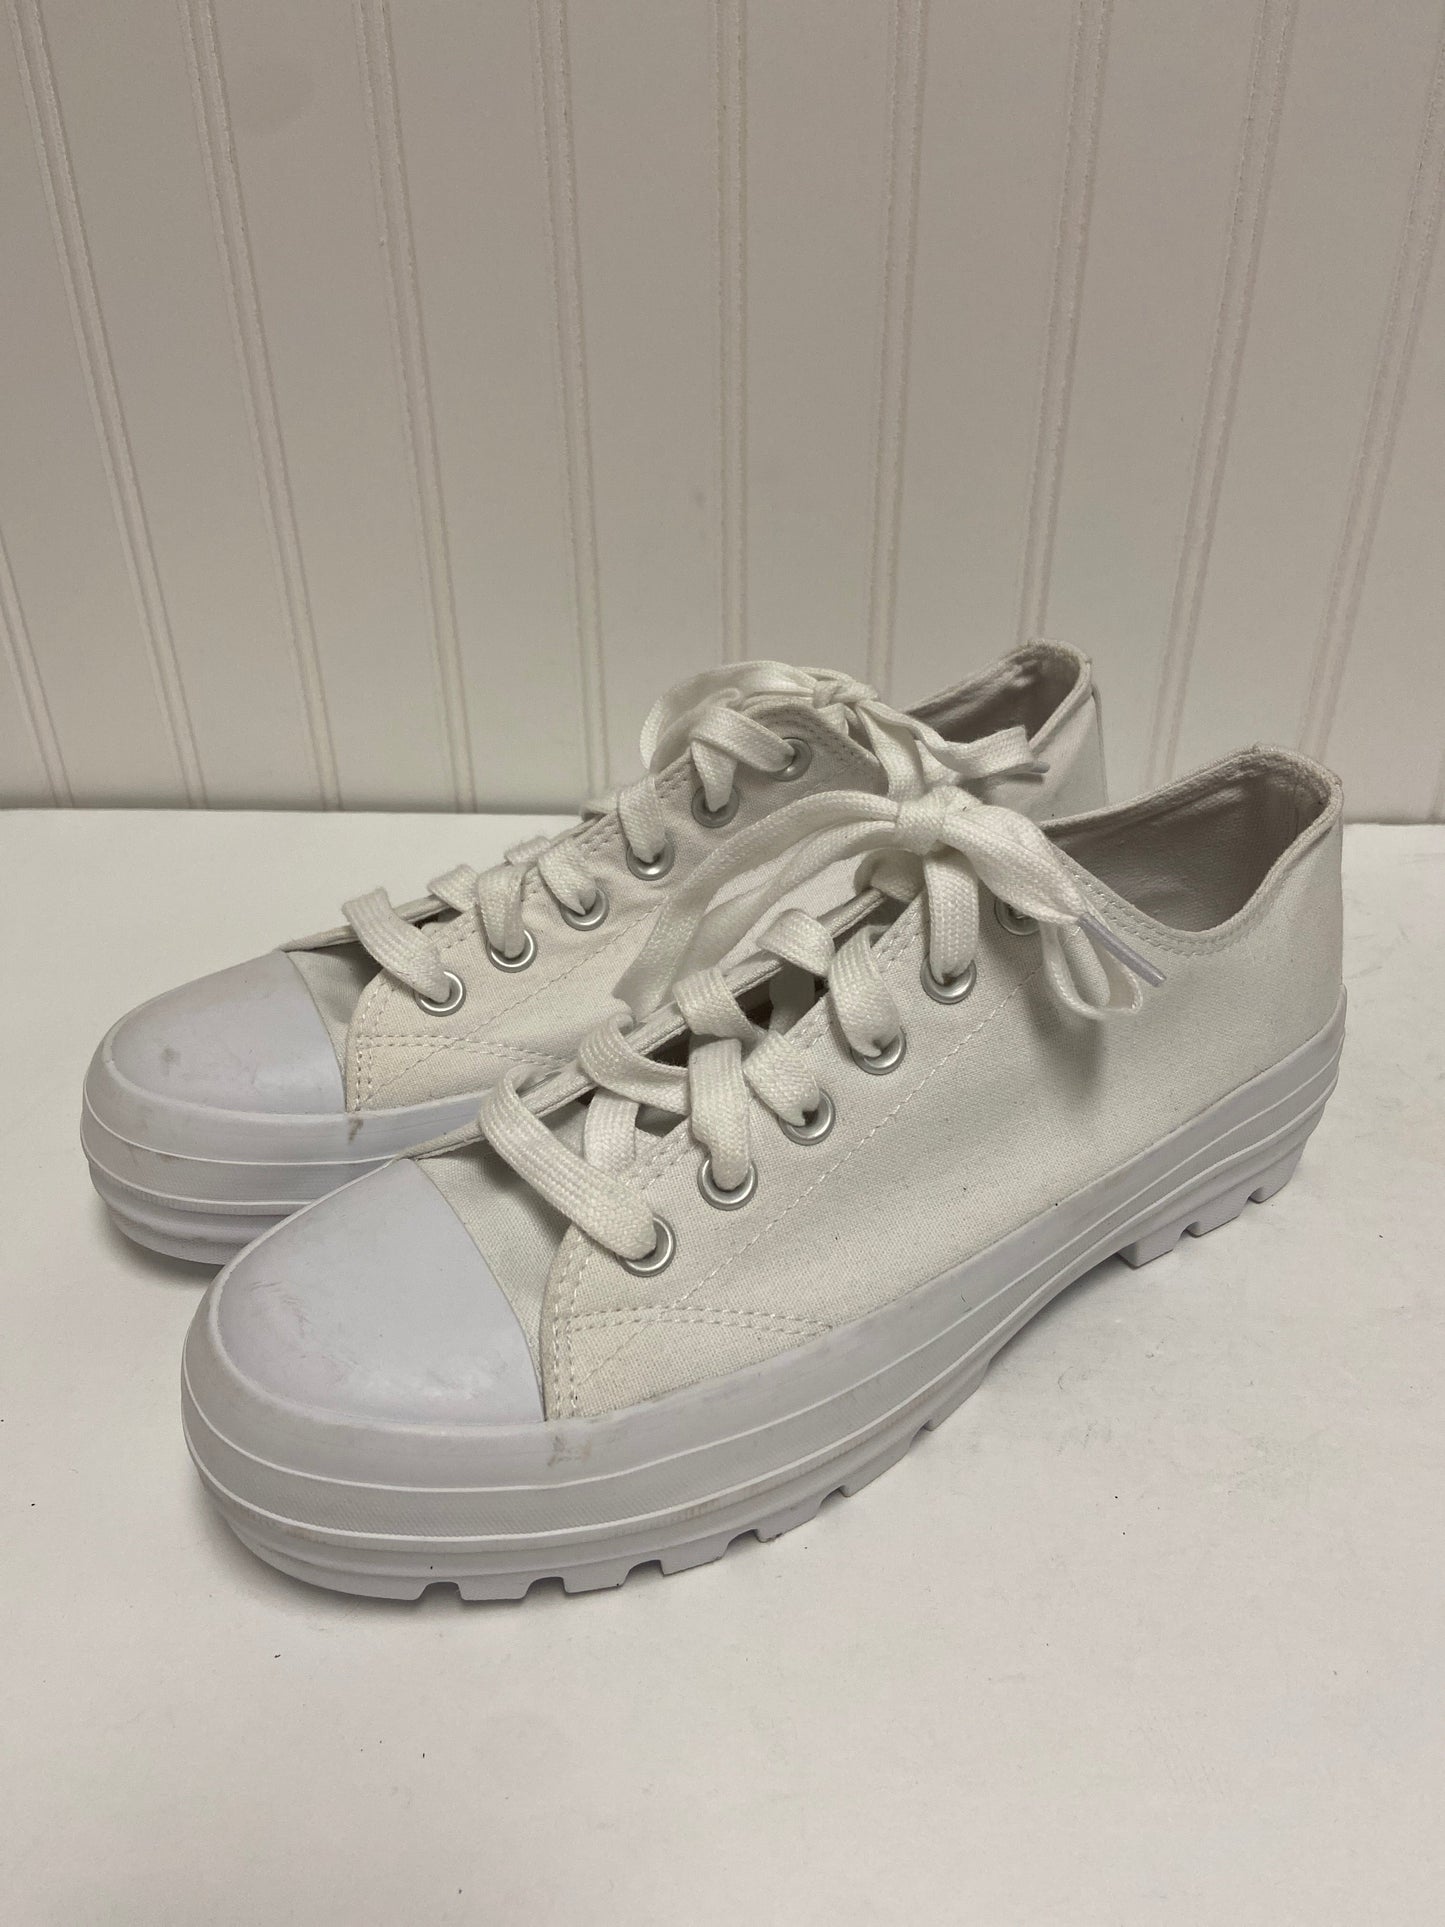 White Shoes Sneakers No Boundaries, Size 9.5